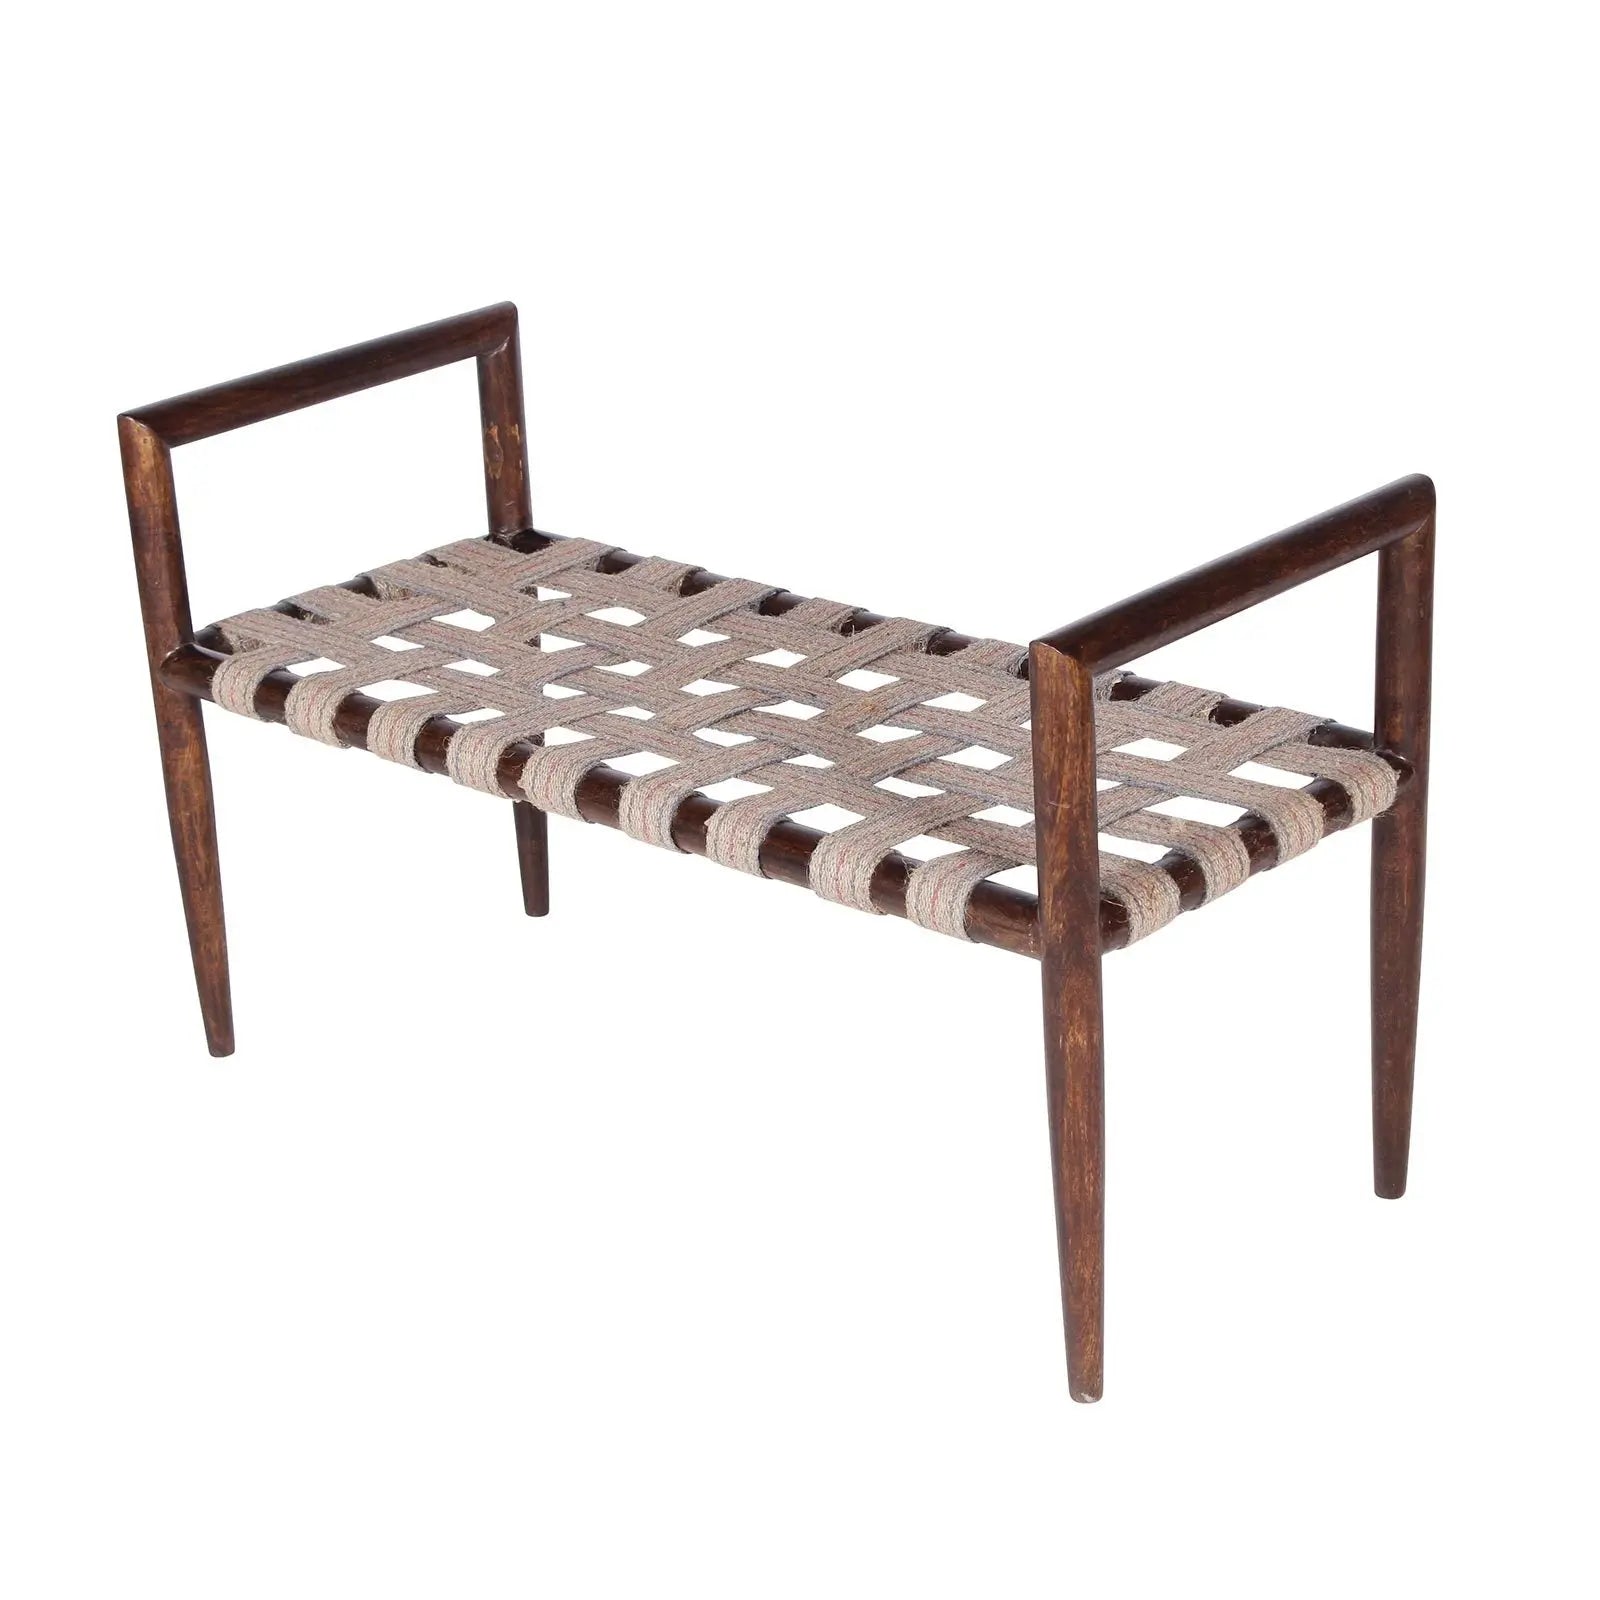 Buy Benches online